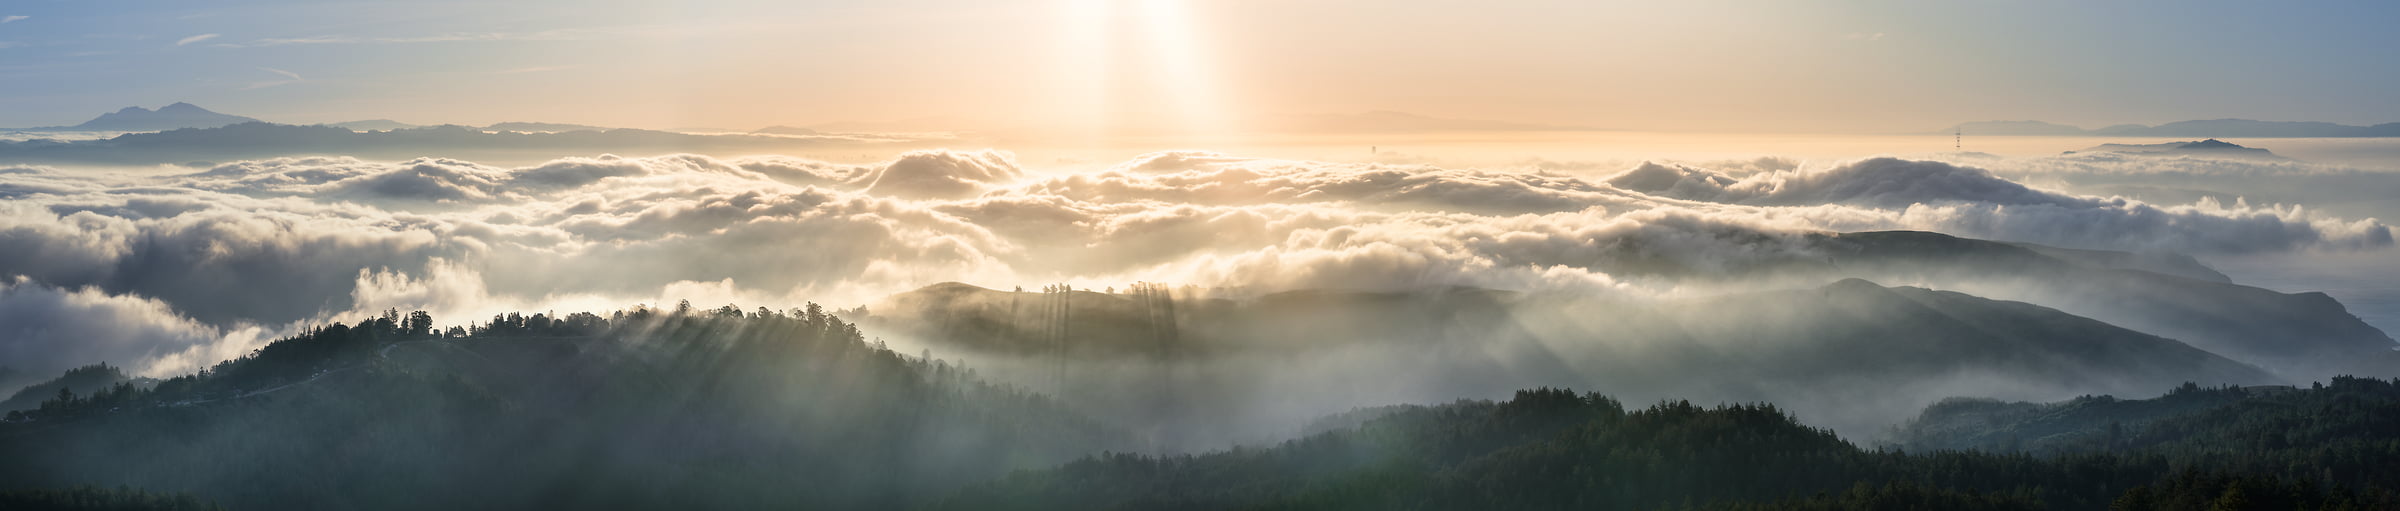 476 megapixels! A very big, high resolution, large-format VAST photo print of a sunrise over mountains and clouds; panorama photograph created by Jeff Lewis in Marin County, California.